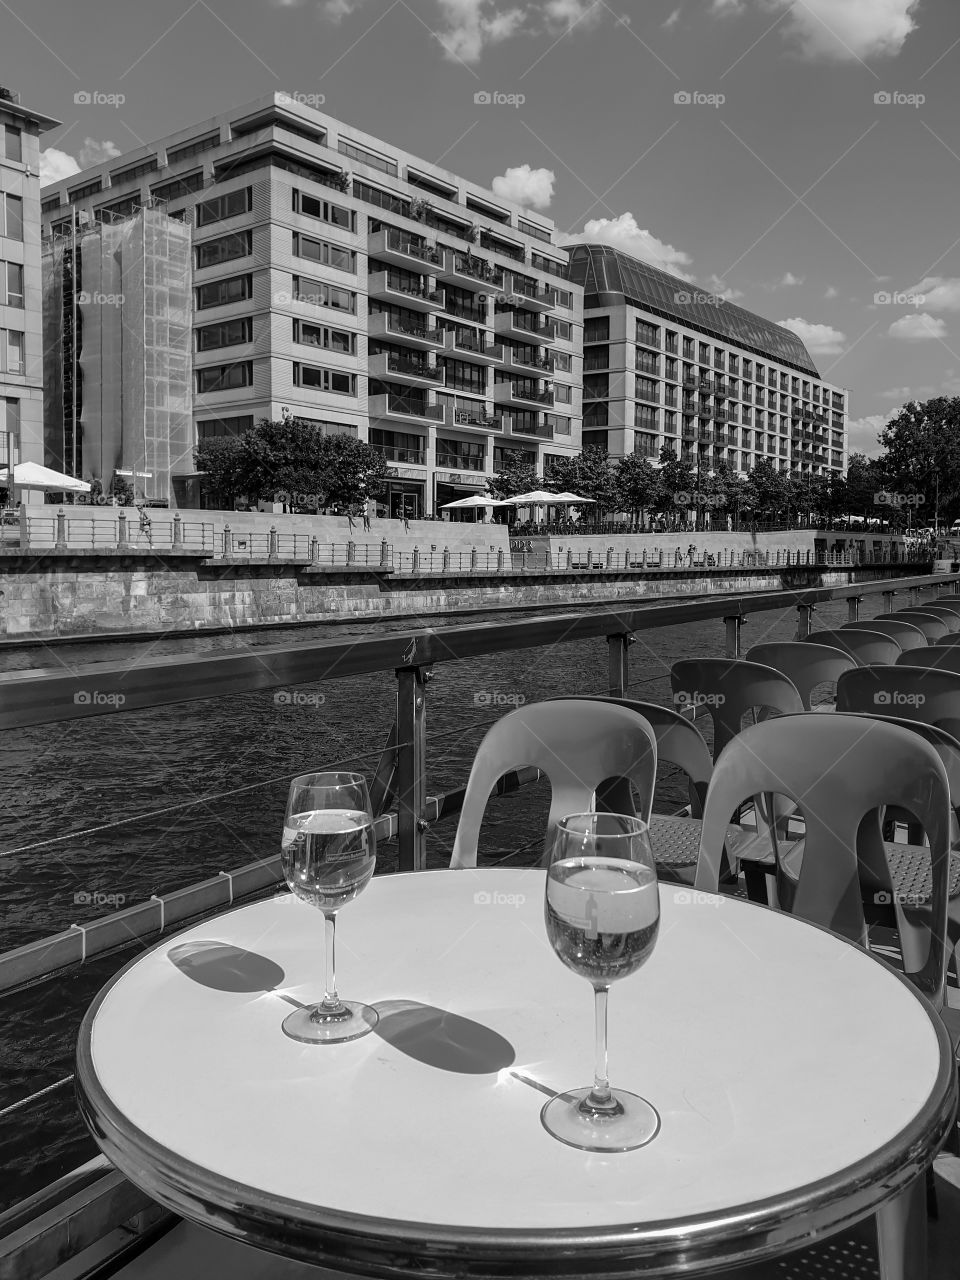 View from the pleasure river ship to the modern houses of the center of Berlin.  Monochrome cityscape with a pleasure boat with two glasses of white wine on the round table